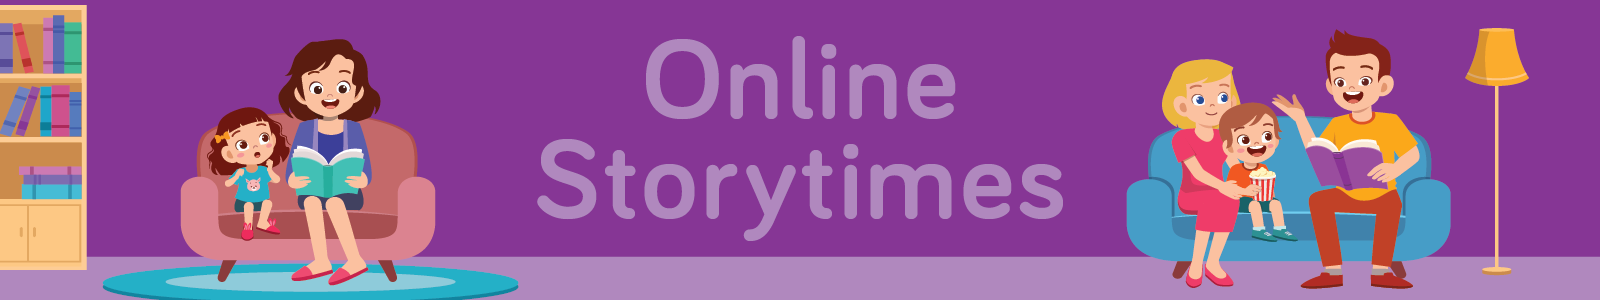 Online Storytimes graphic banner